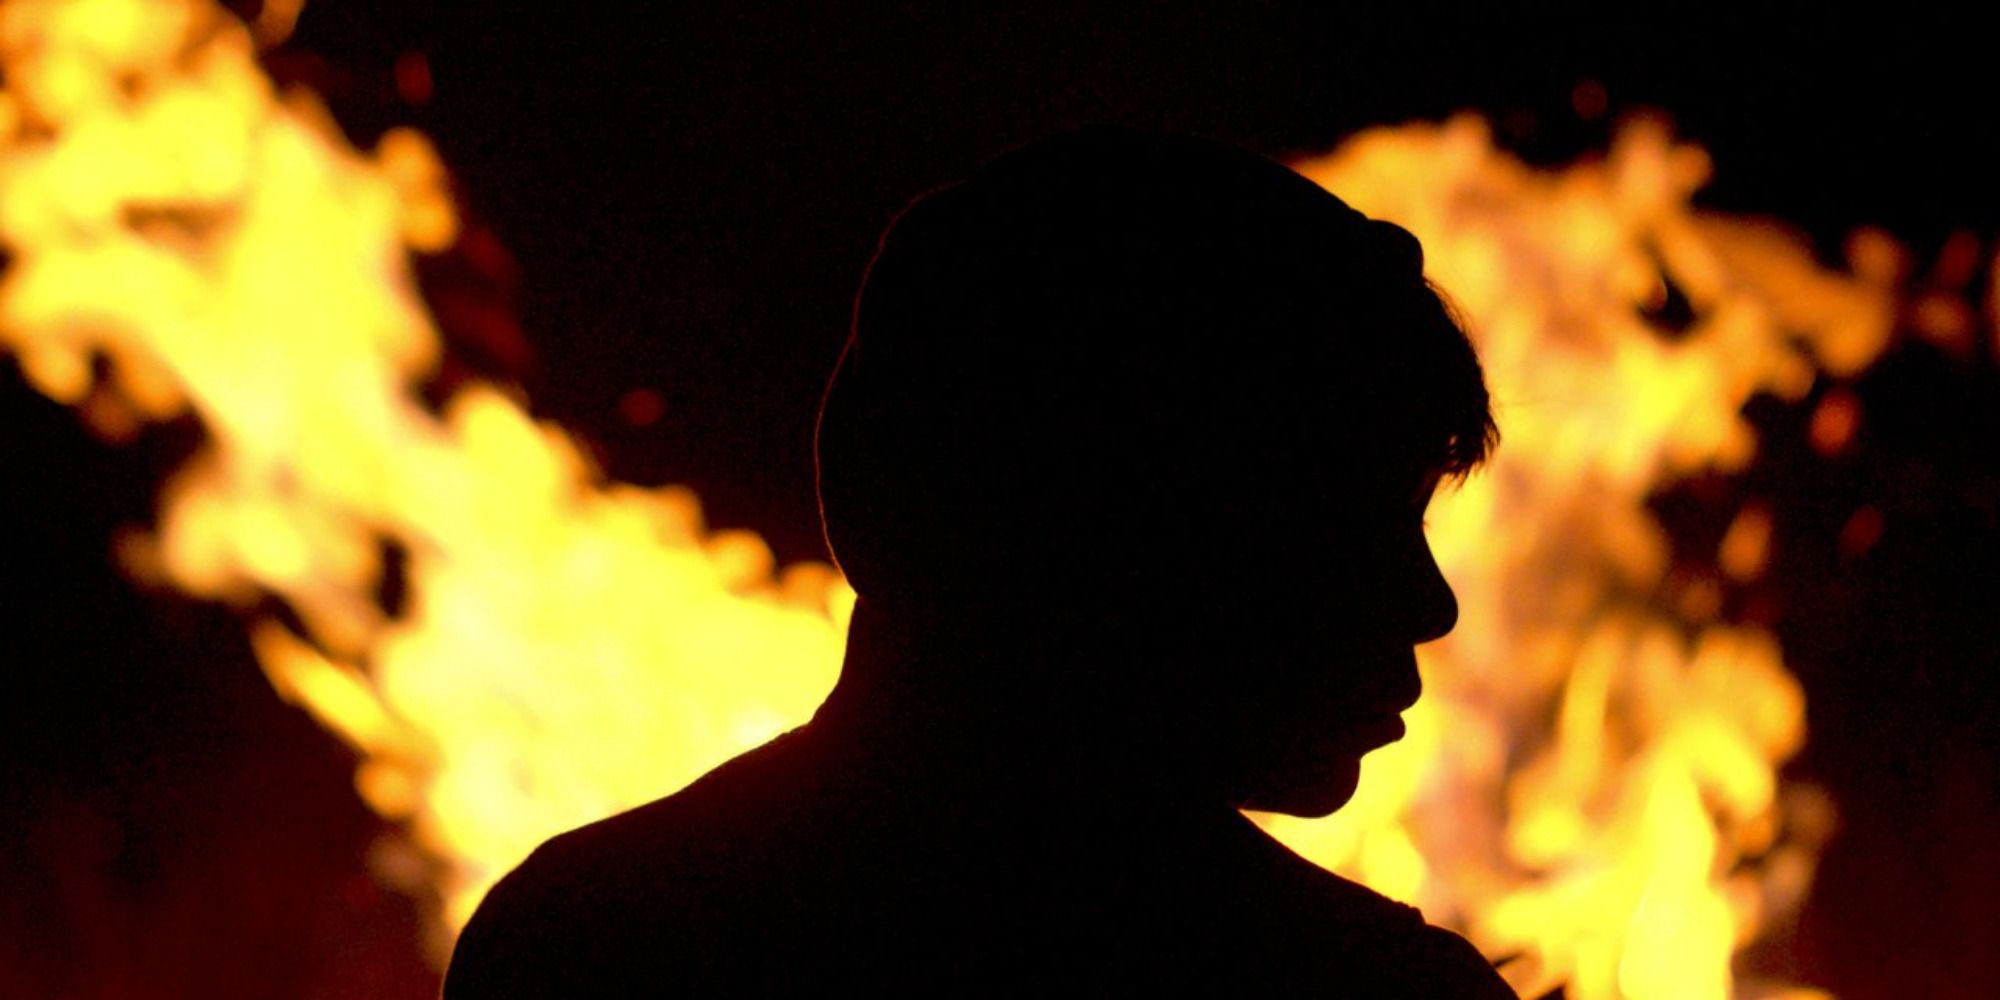 an obscured figure in front of fire from film "Identifying Features"